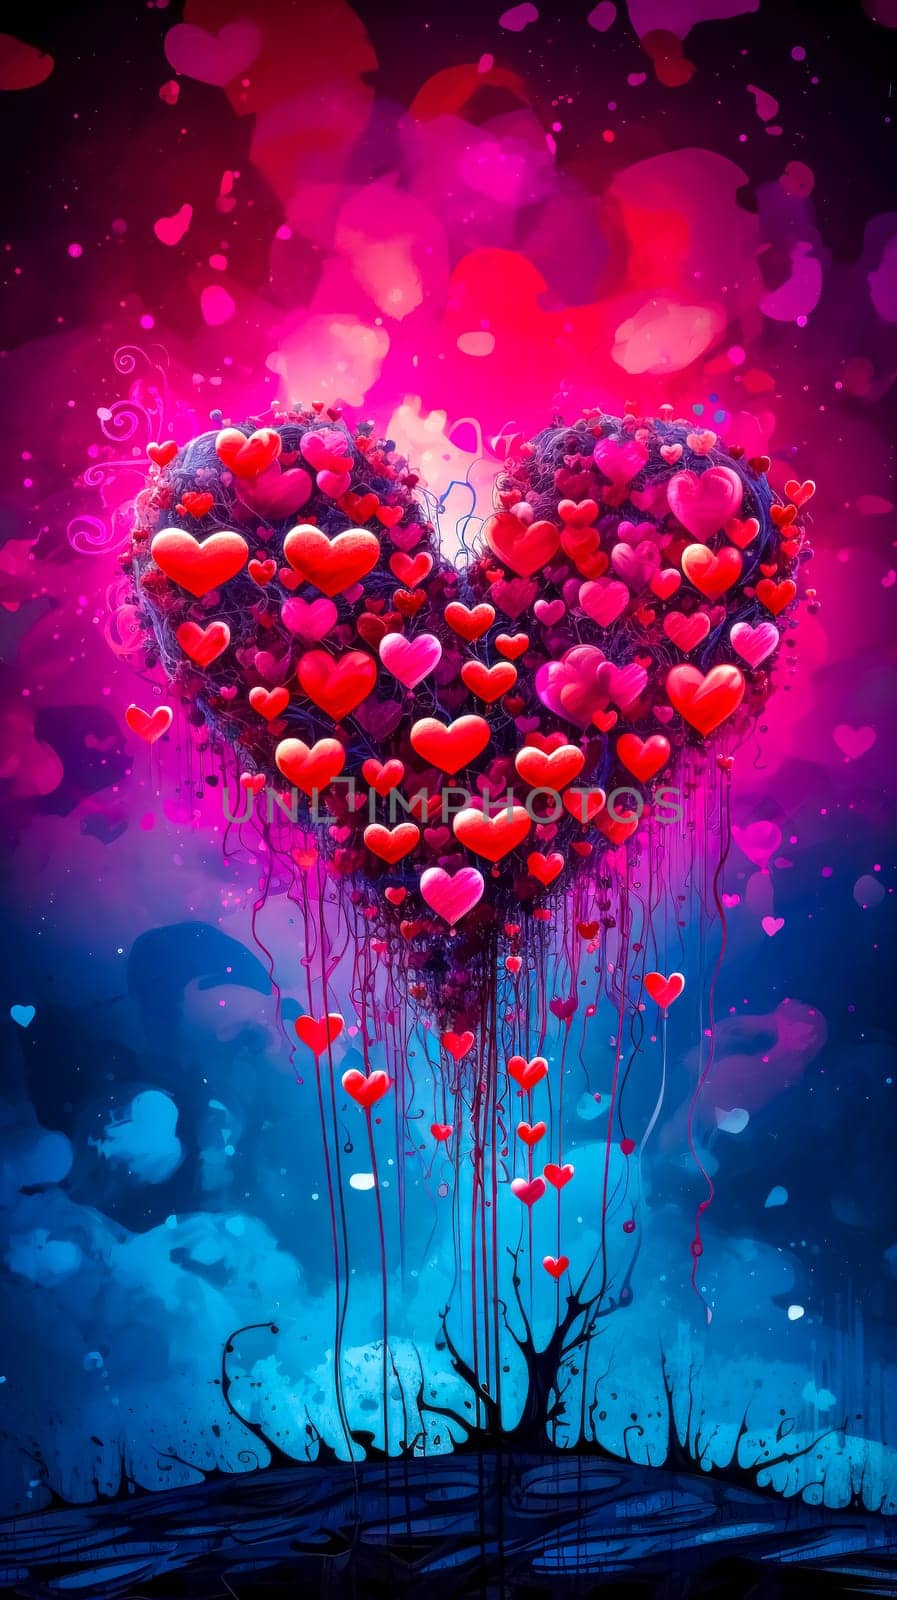 whimsical, heart-shaped tree with branches adorned with various sized hearts, set against a dreamy pink and blue background, embodying a romantic and fantastical Valentine's Day theme. vertical